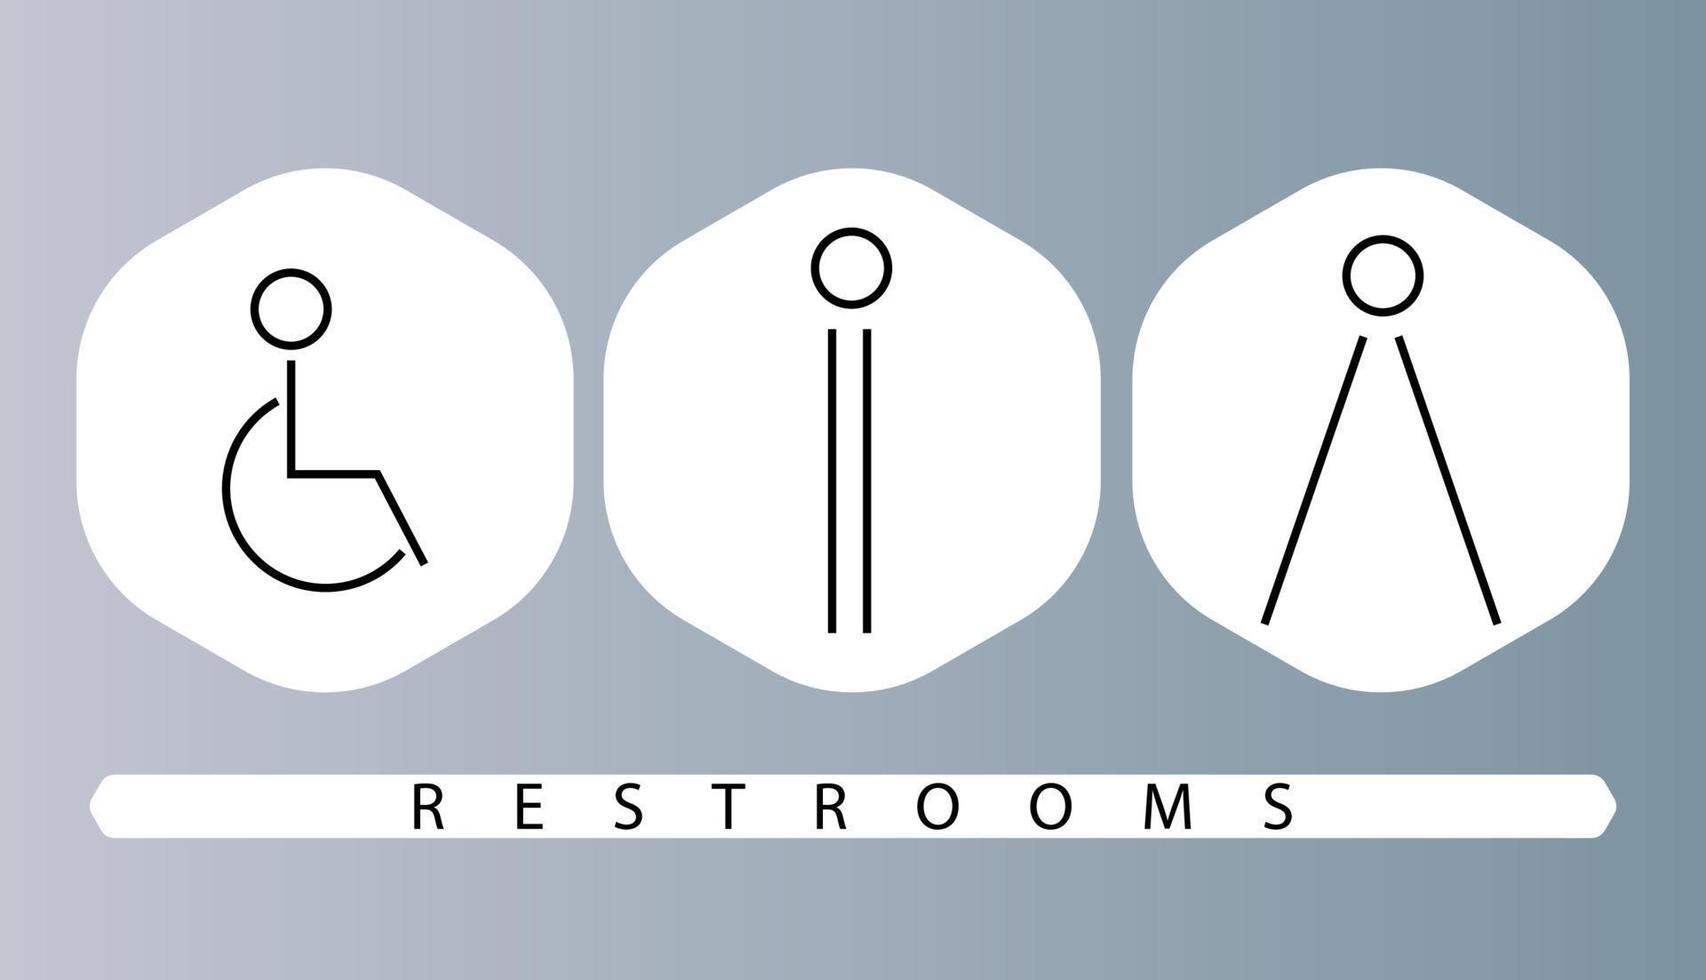 Simple toilet signs, man woman and disabled access icons, bathroom vector